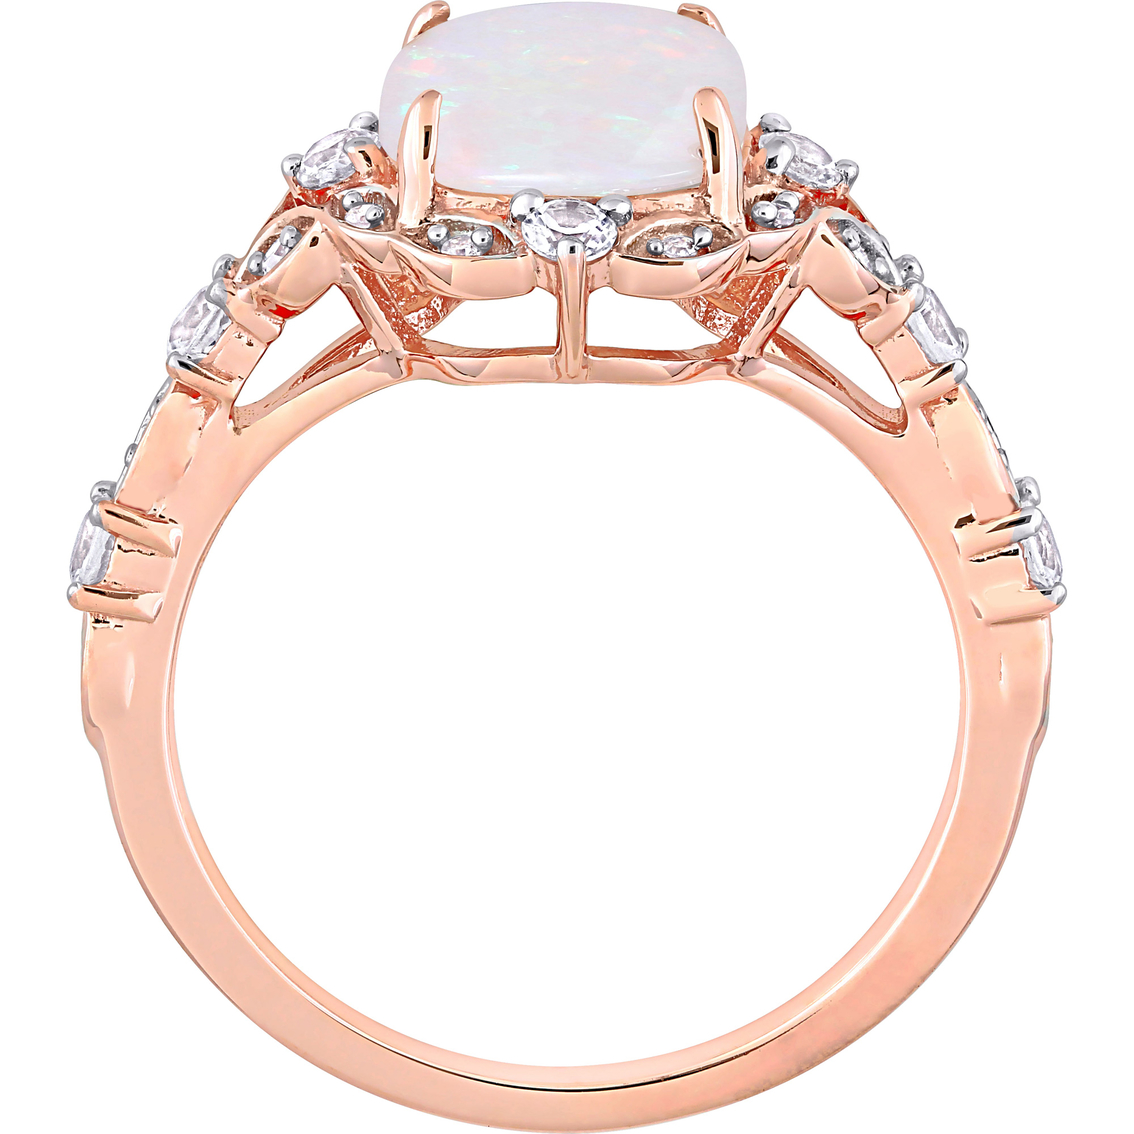 Sofia B. 10K Rose Gold Opal, White Sapphire and Diamond Accent Vintage Ring - Image 2 of 4